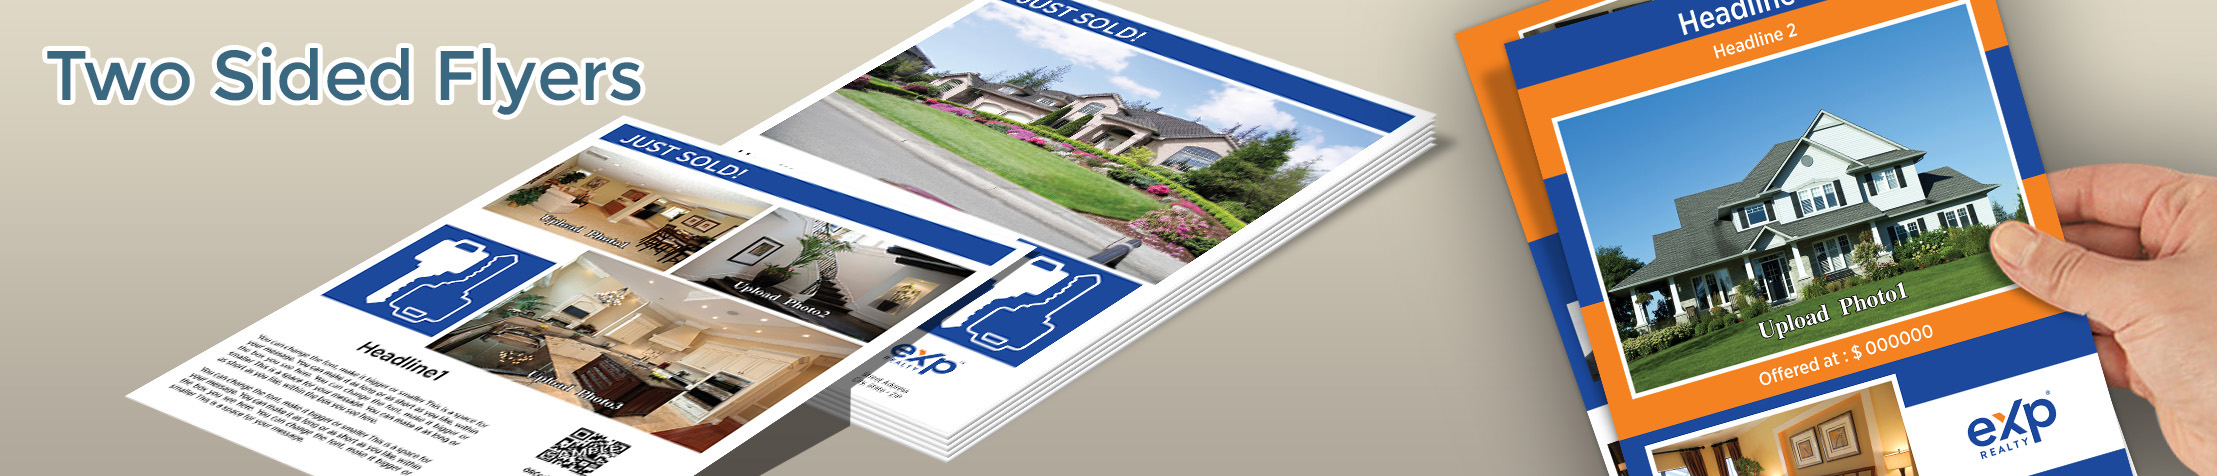  Real Estate Flyers and Brochures -  two-sided flyer templates for open houses and marketing | BestPrintBuy.com